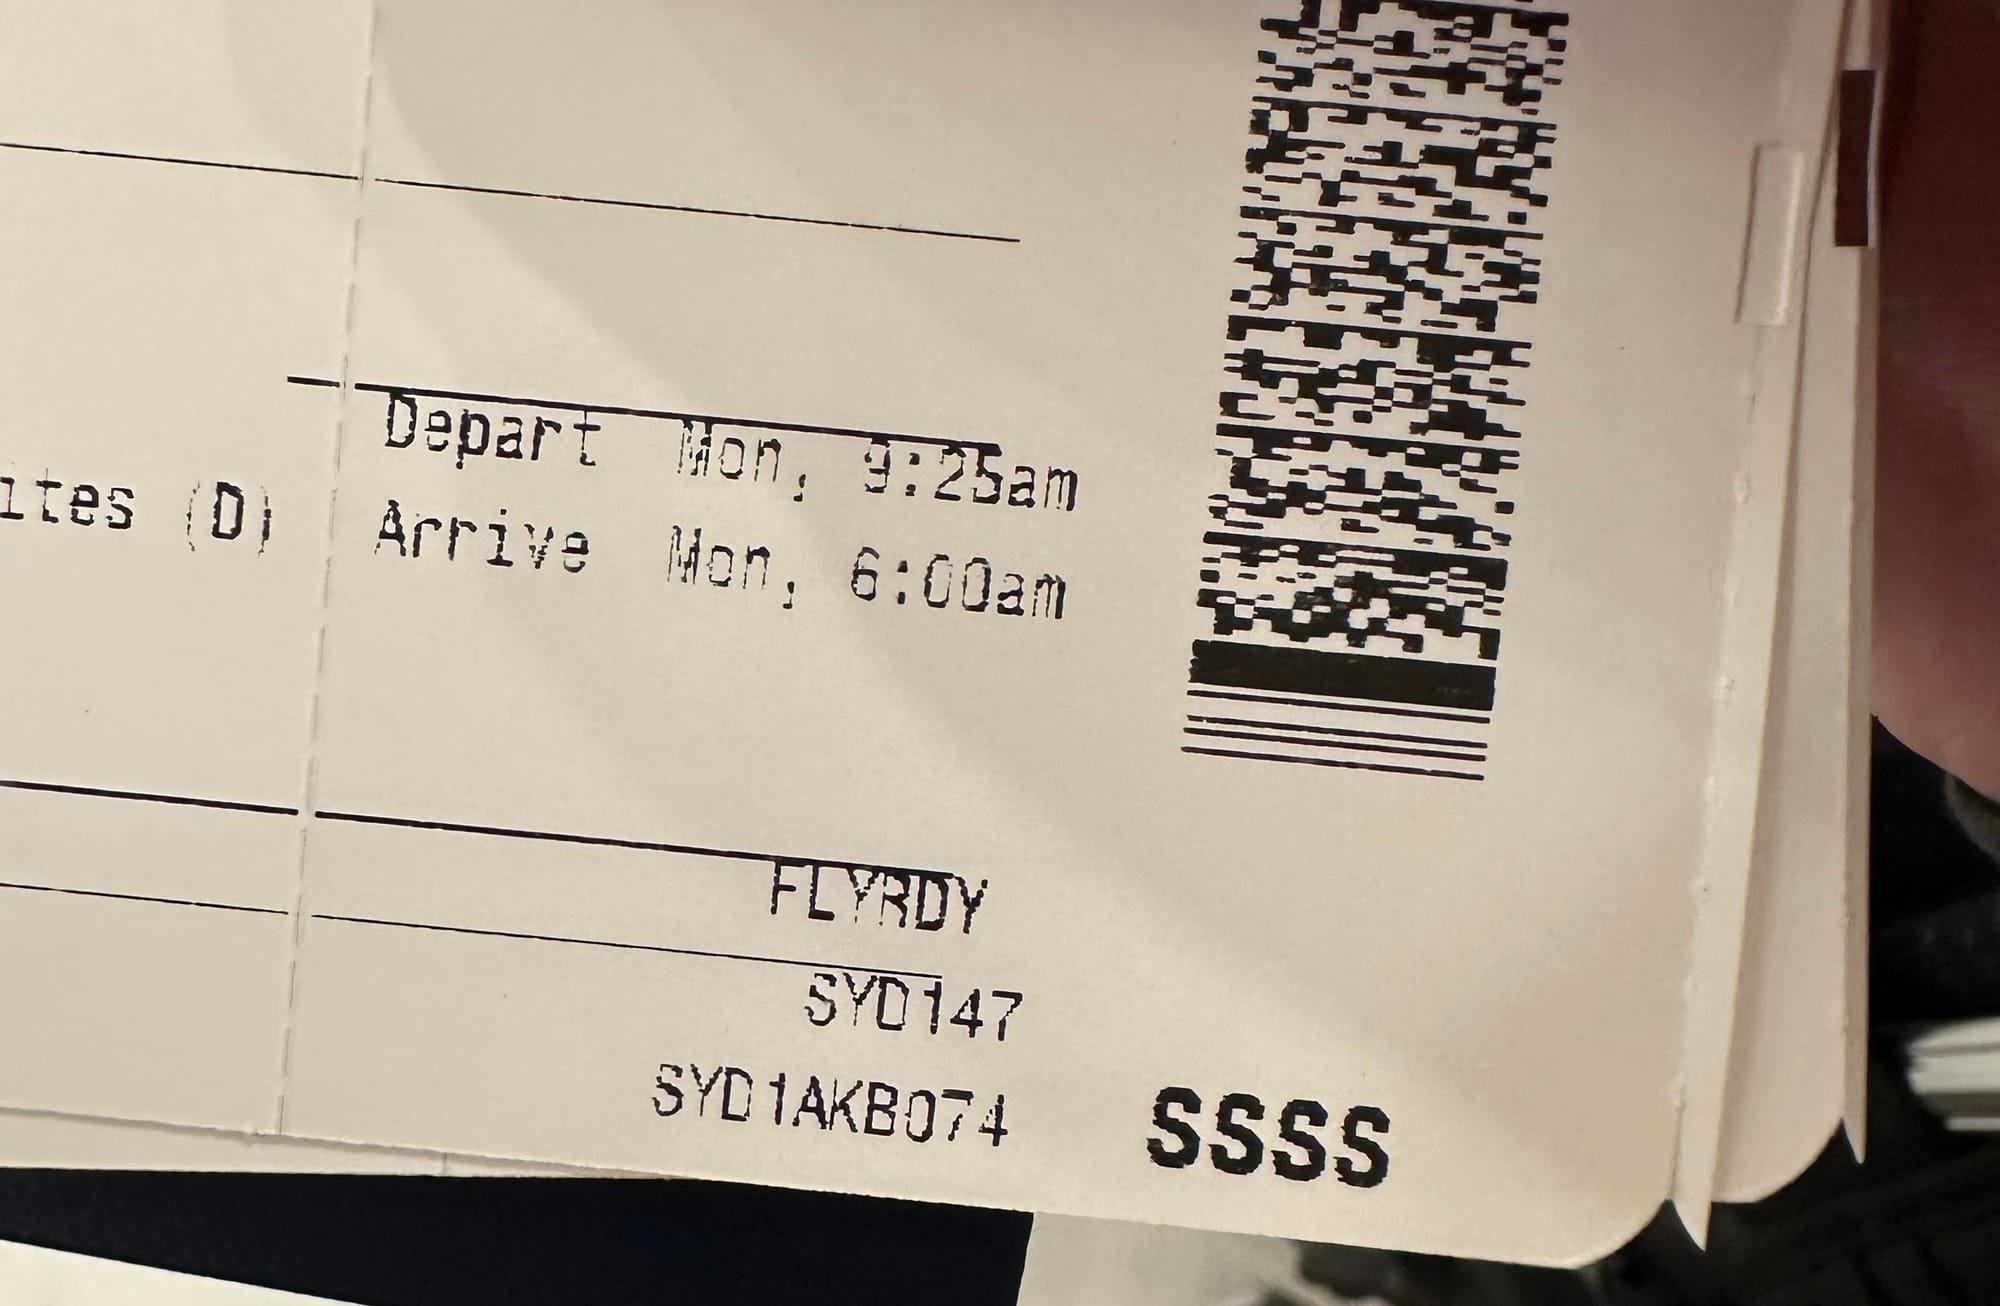 What Does SSSS Mean on My Boarding Pass?